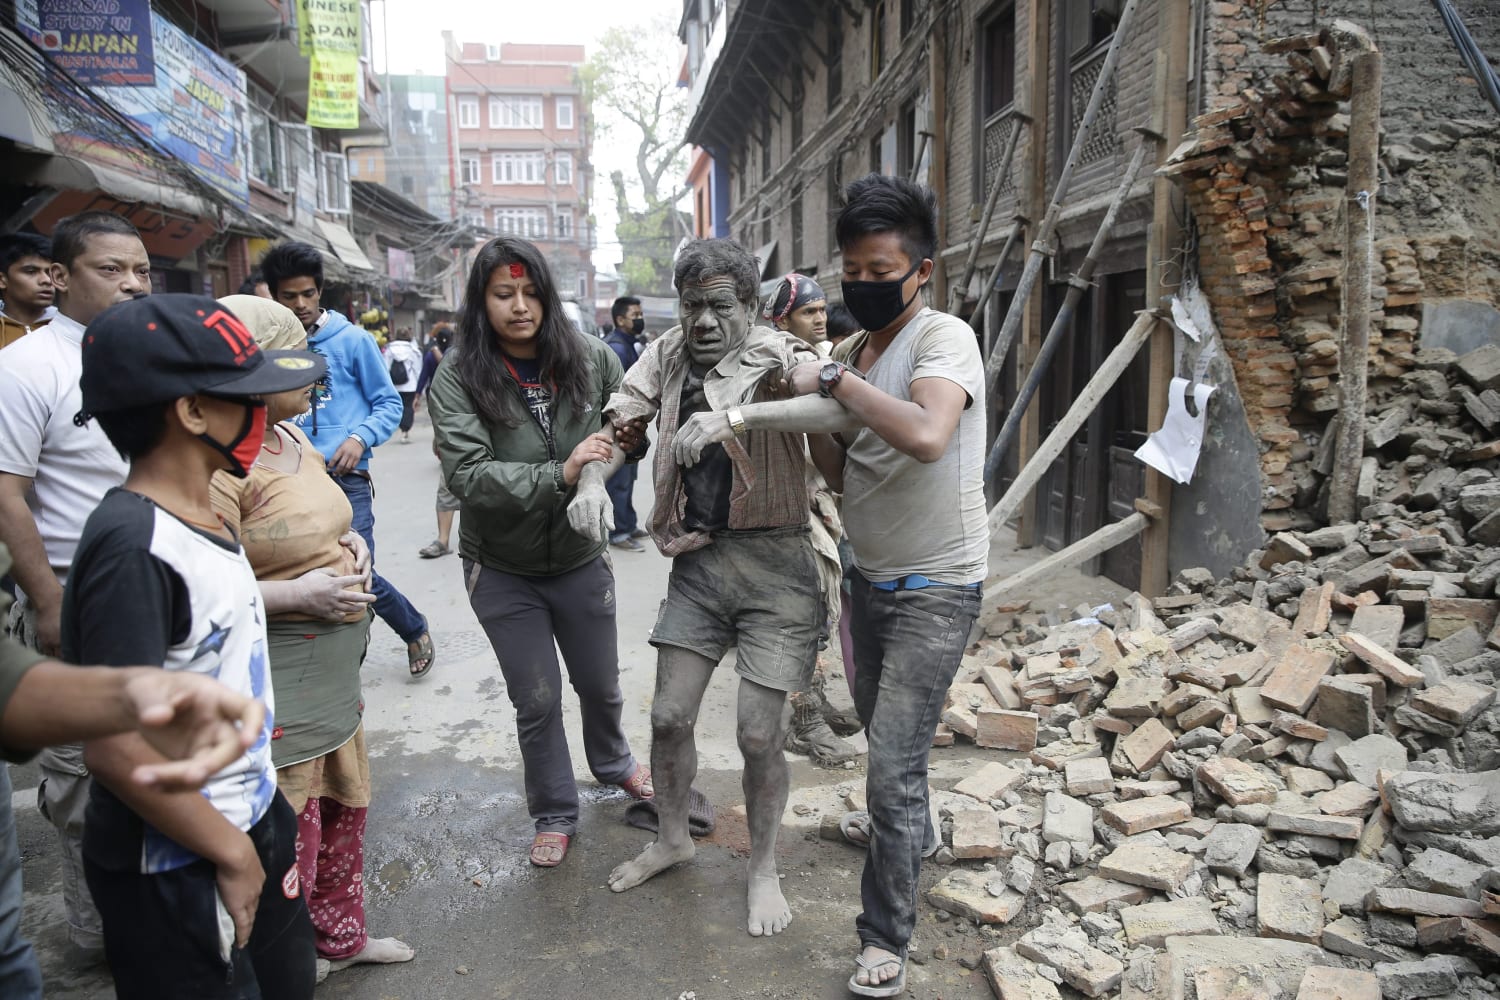 Nepal Earthquake: At Least 1,130 Dead After 7.8-Magnitude Tremor.